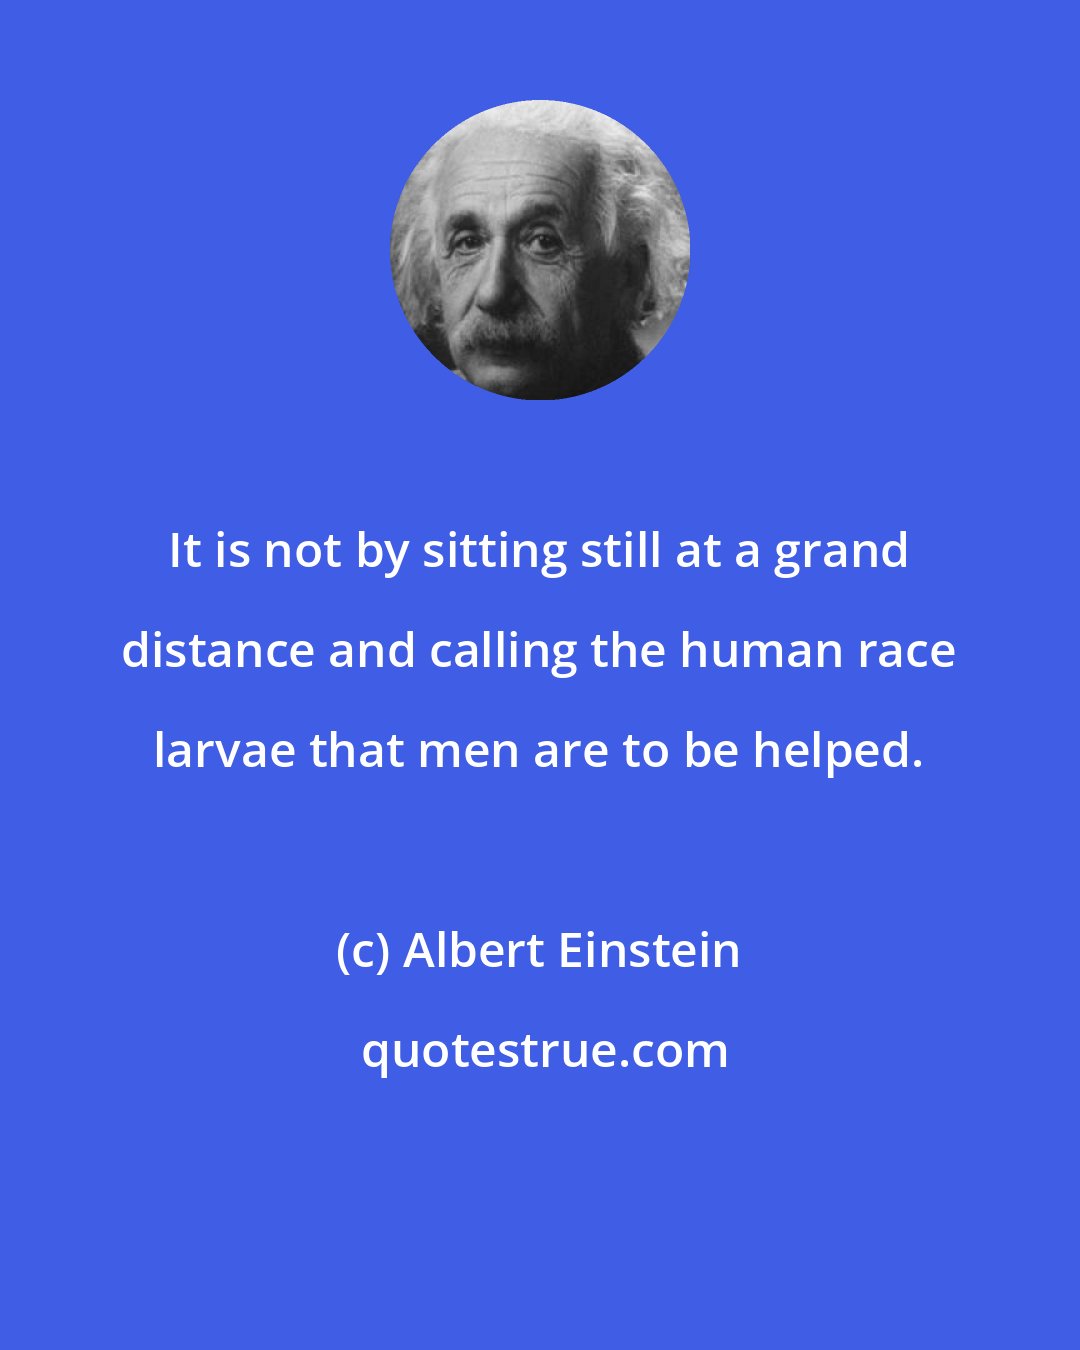 Albert Einstein: It is not by sitting still at a grand distance and calling the human race larvae that men are to be helped.